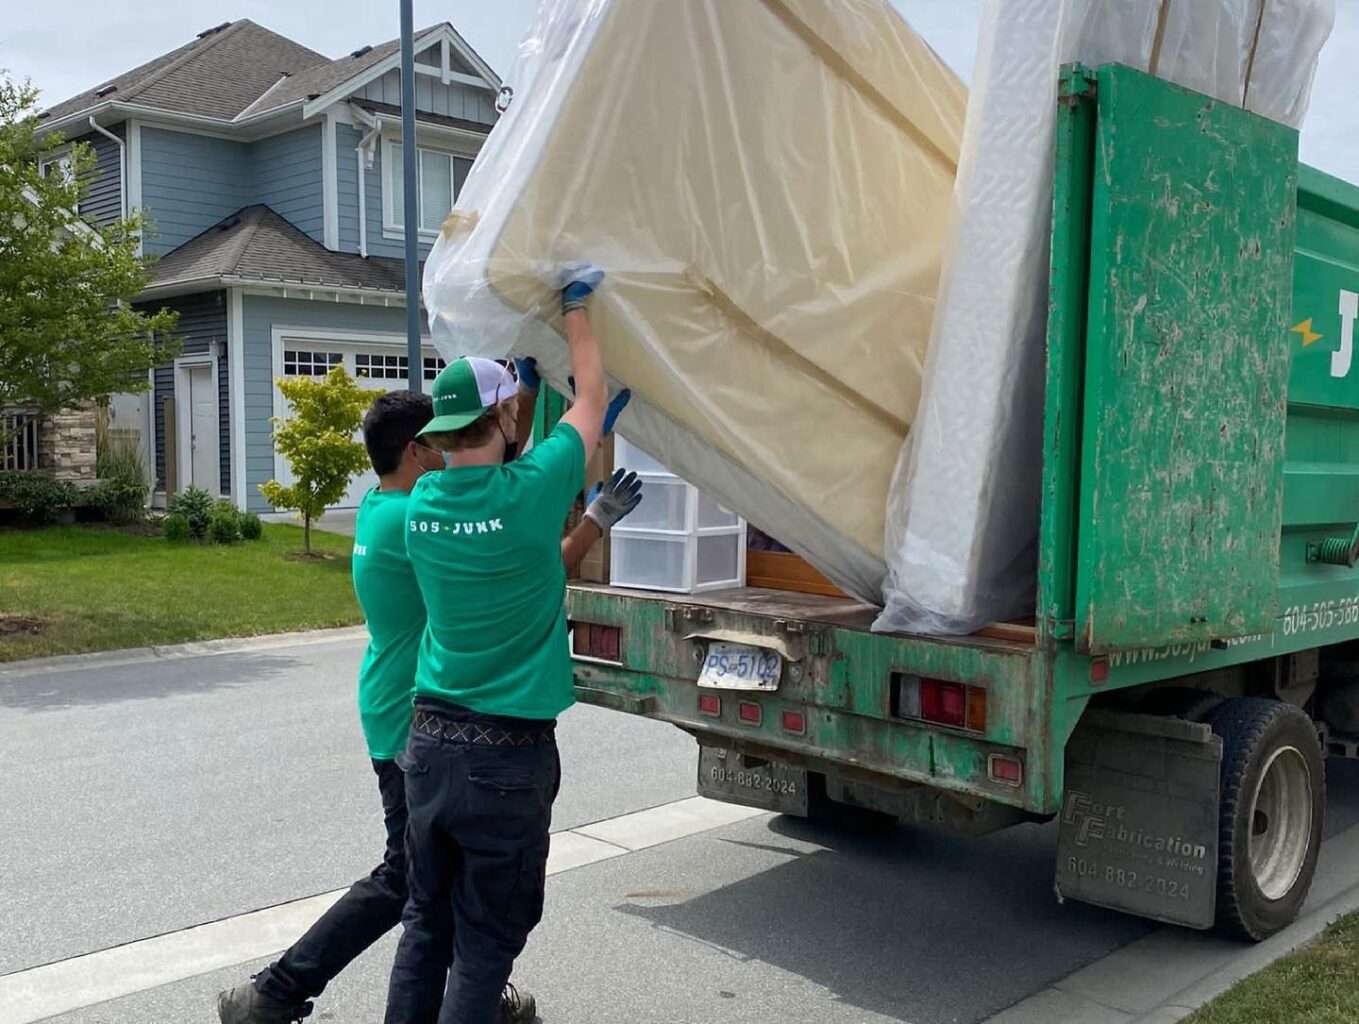 2 teammates lifting a mattress into a 505-Junk truck to be recycled.